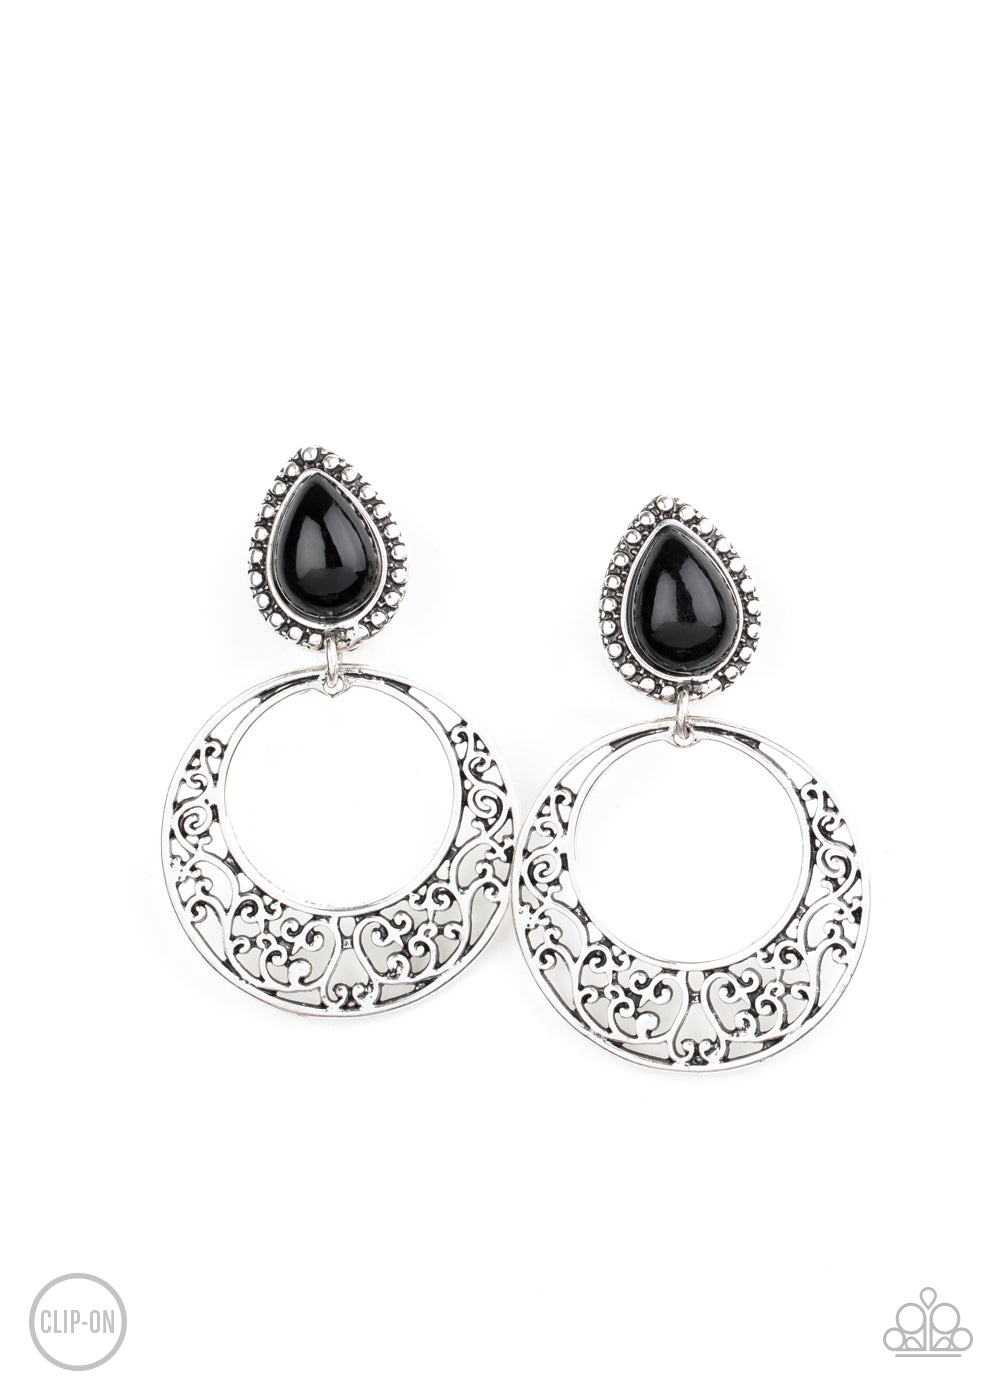 Paparazzi Accessories Exotic Escapes - Black Clip-on Earrings - Lady T Accessories